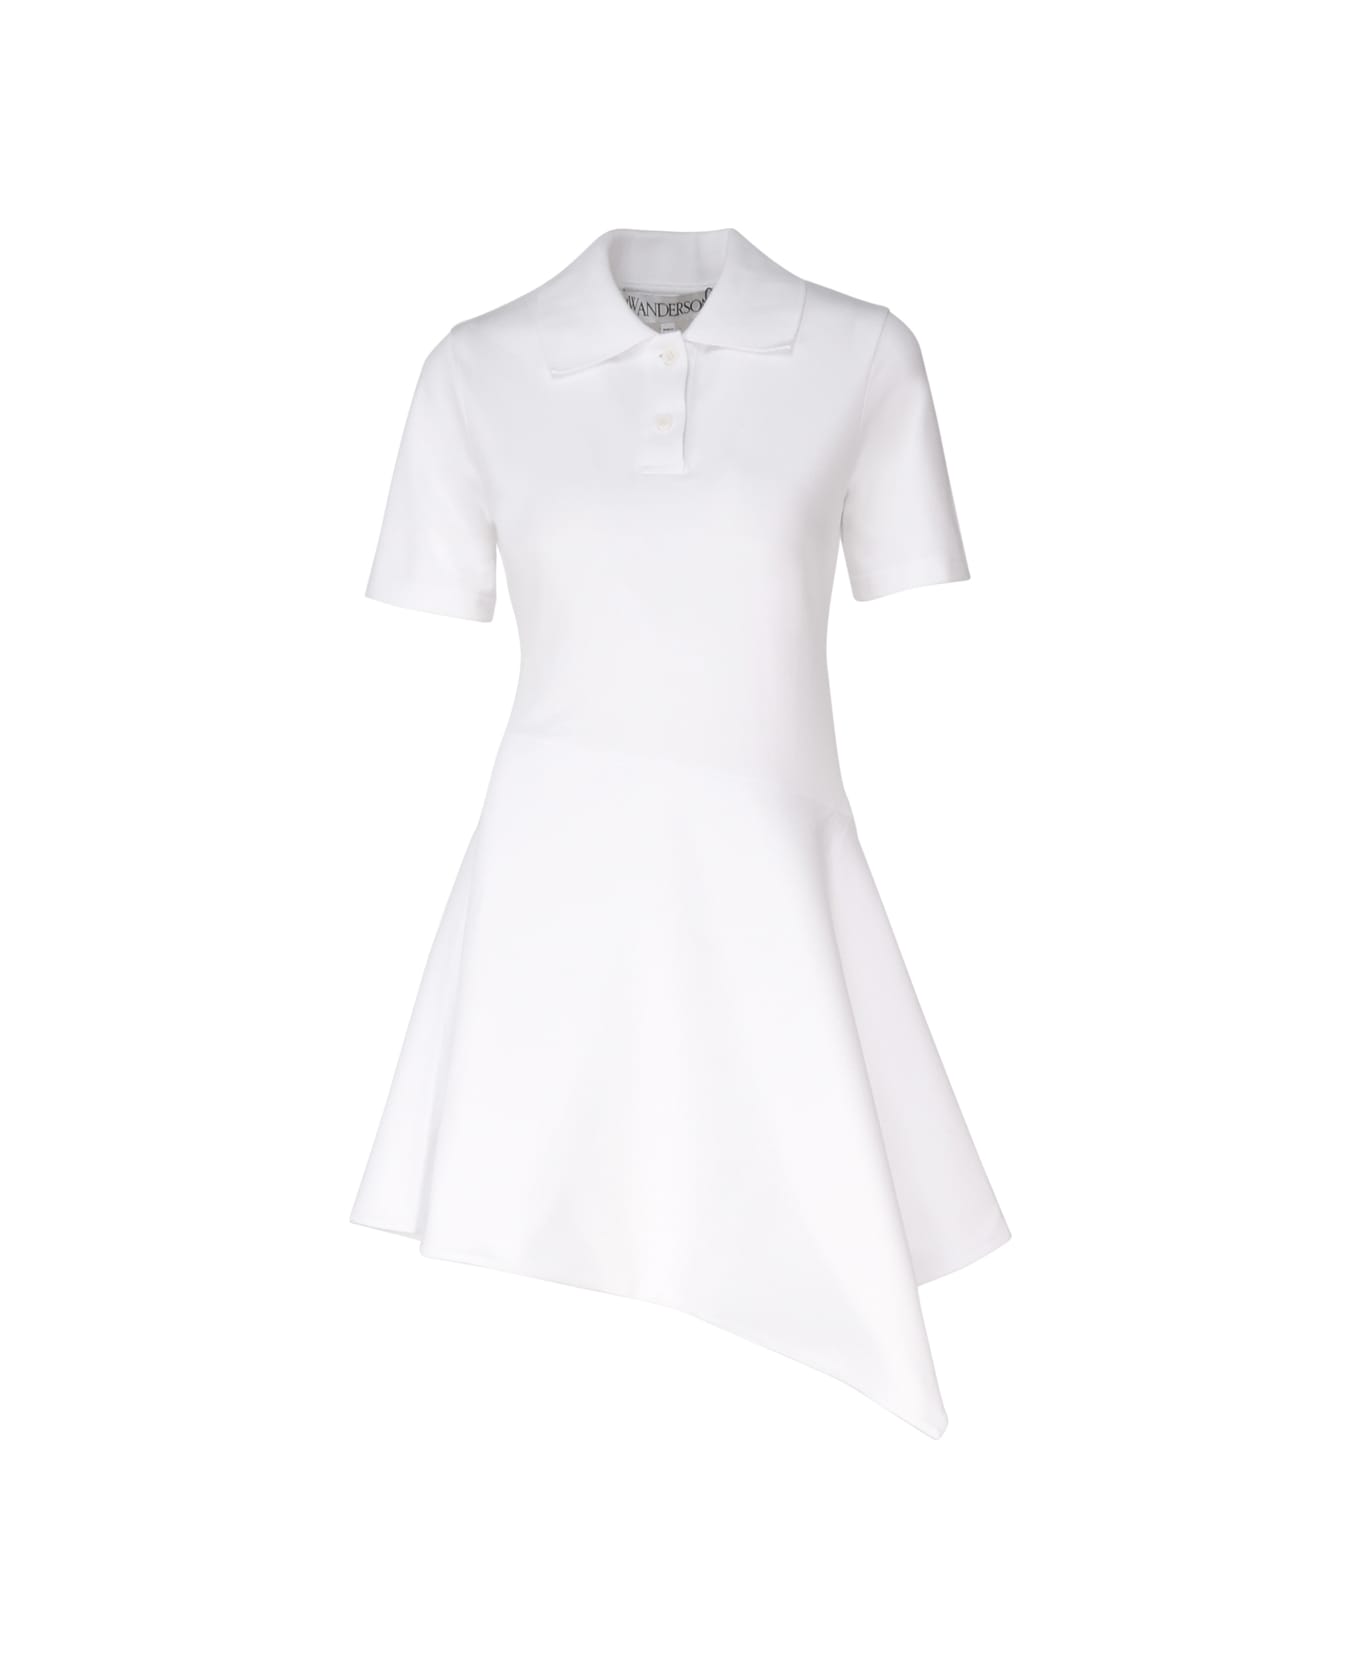 J.W. Anderson Asymmetric Dress With Polo-style Collar - White